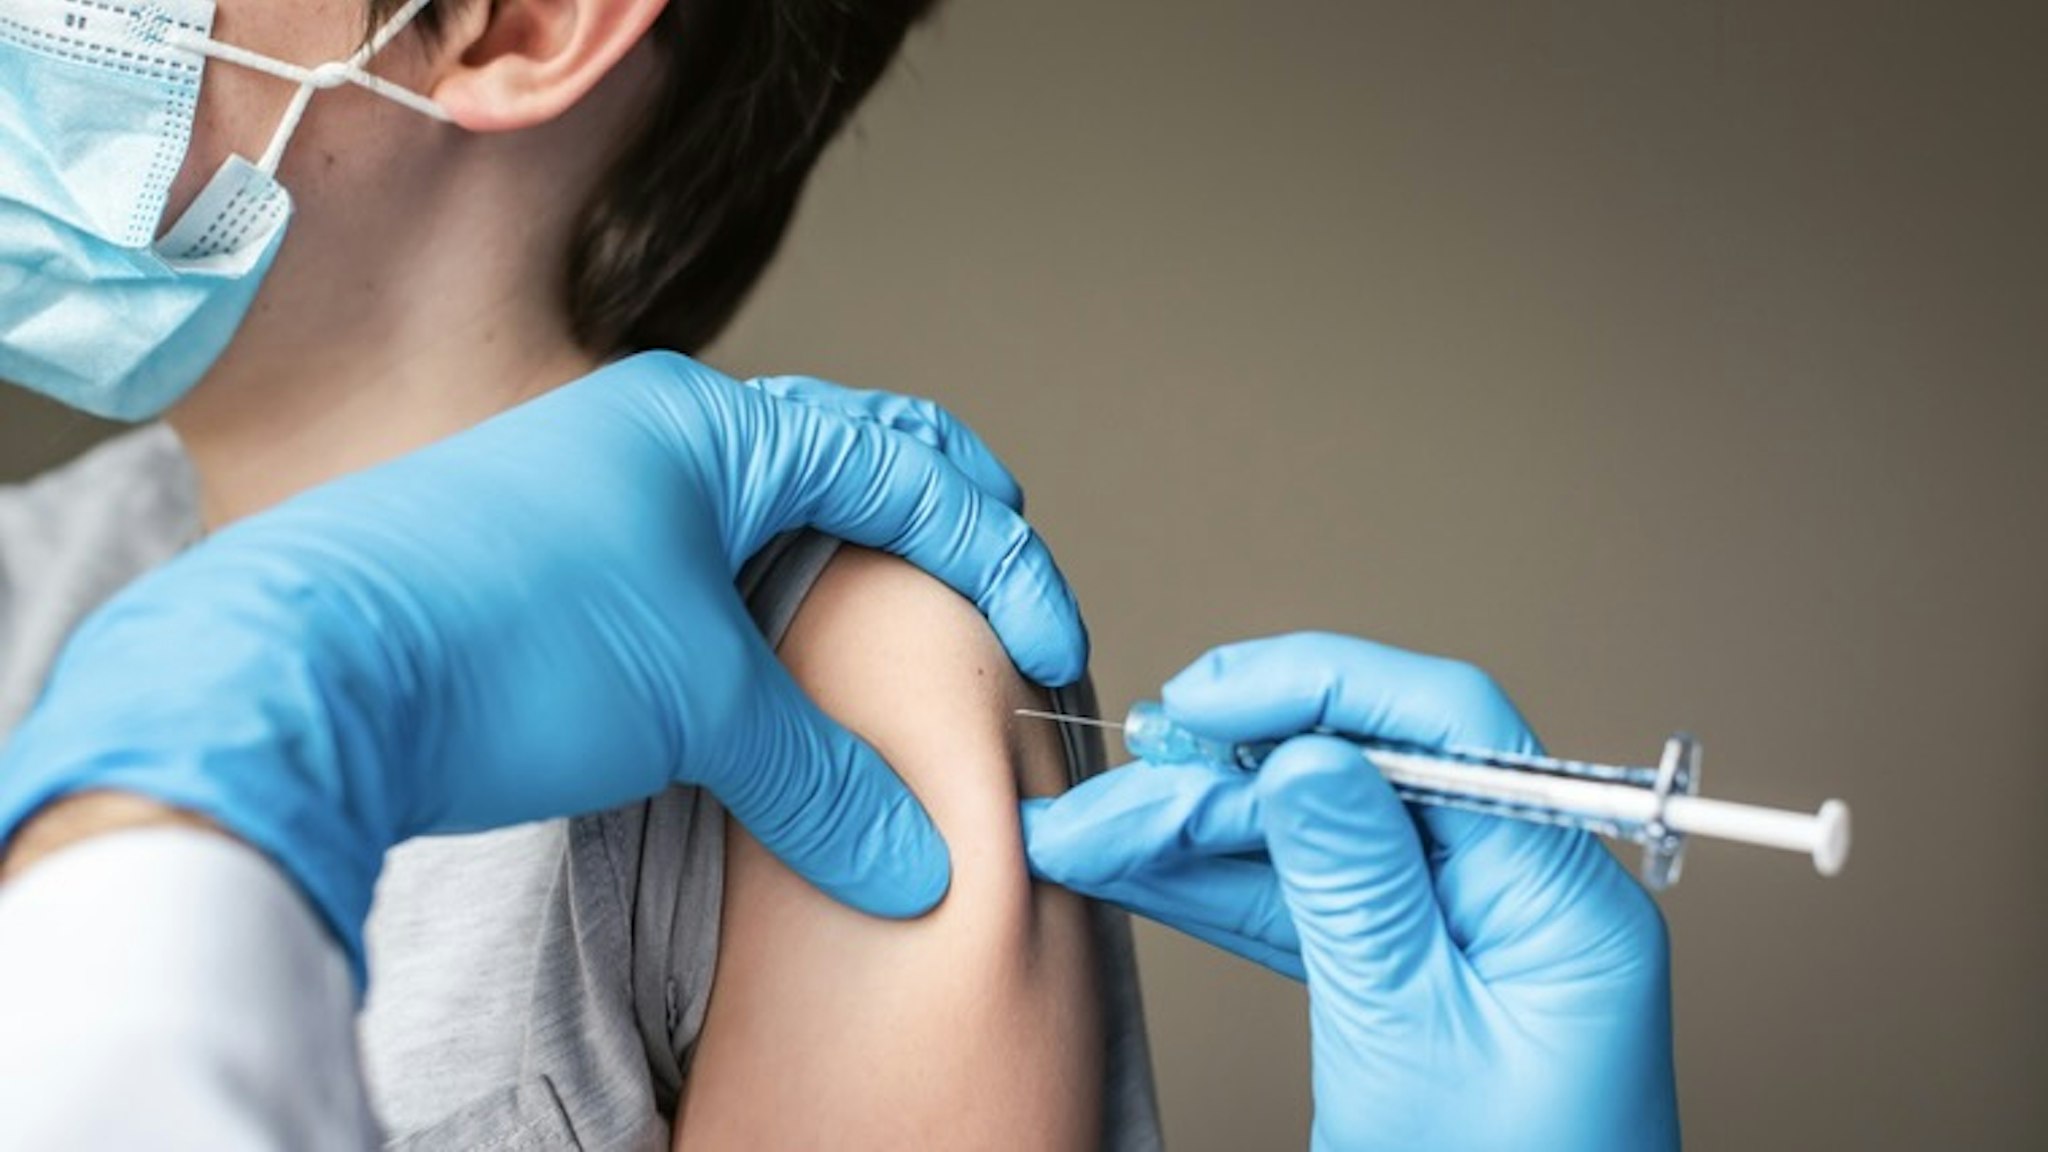 Child wearing mask getting vaccinated by doctor holding a needle. - stock photo Cavan Images via Getty Images